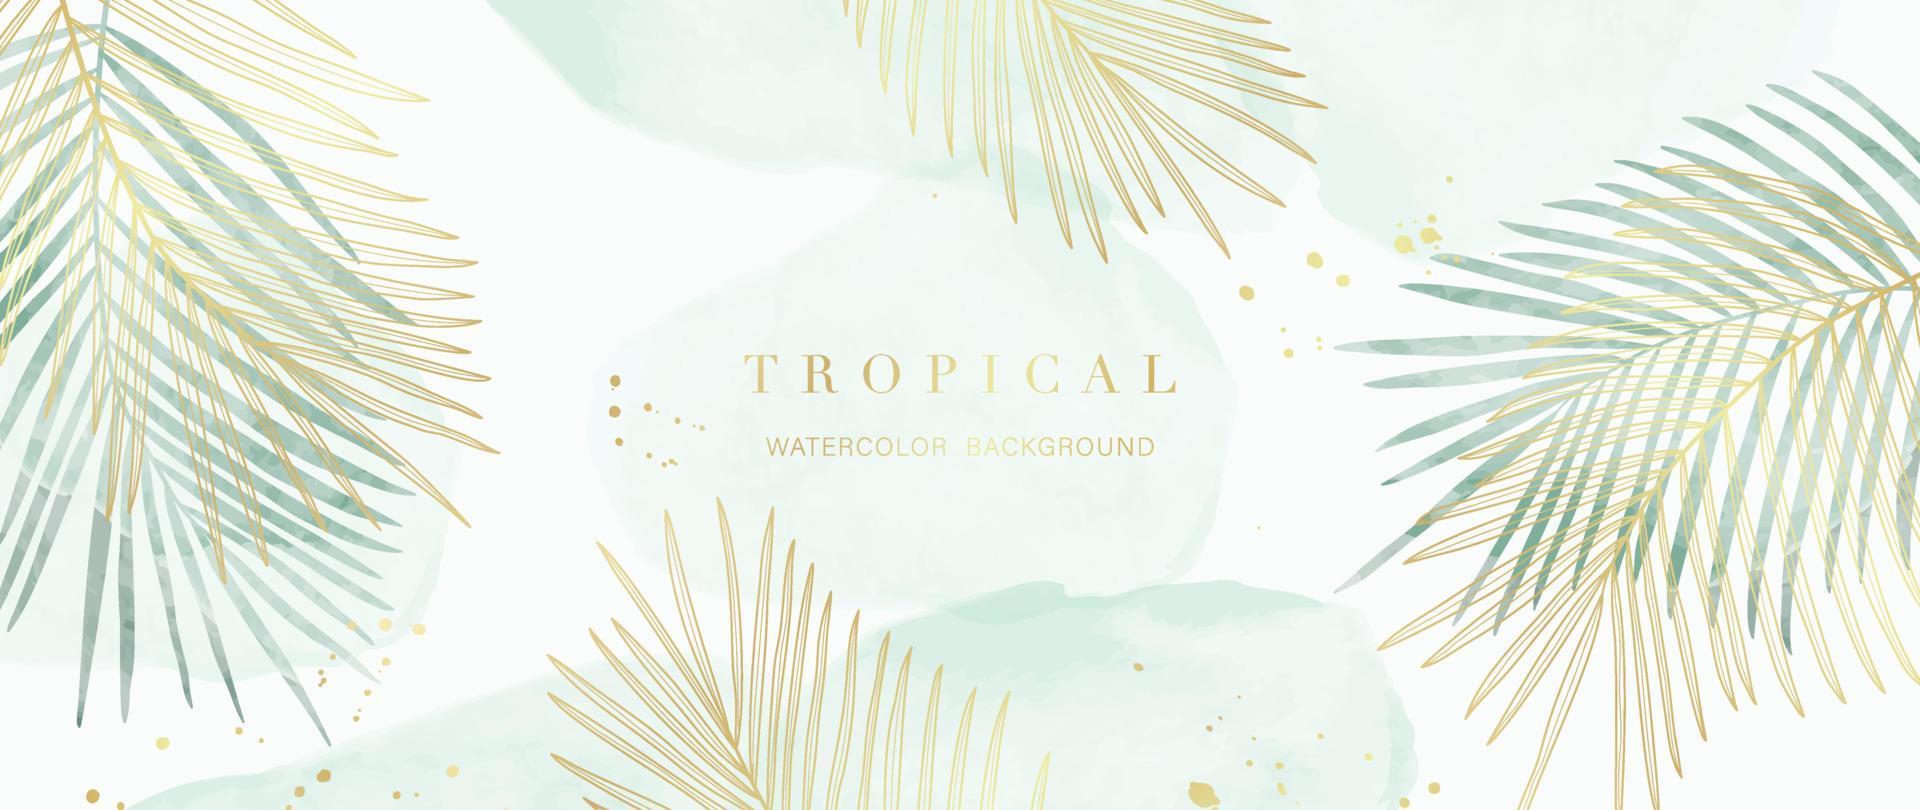 Tropical foliage watercolor background vector. Summer botanical design with gold line art, palm leaves, green watercolor texture. Luxury tropical illustration for banner, poster, web and wallpaper. vector